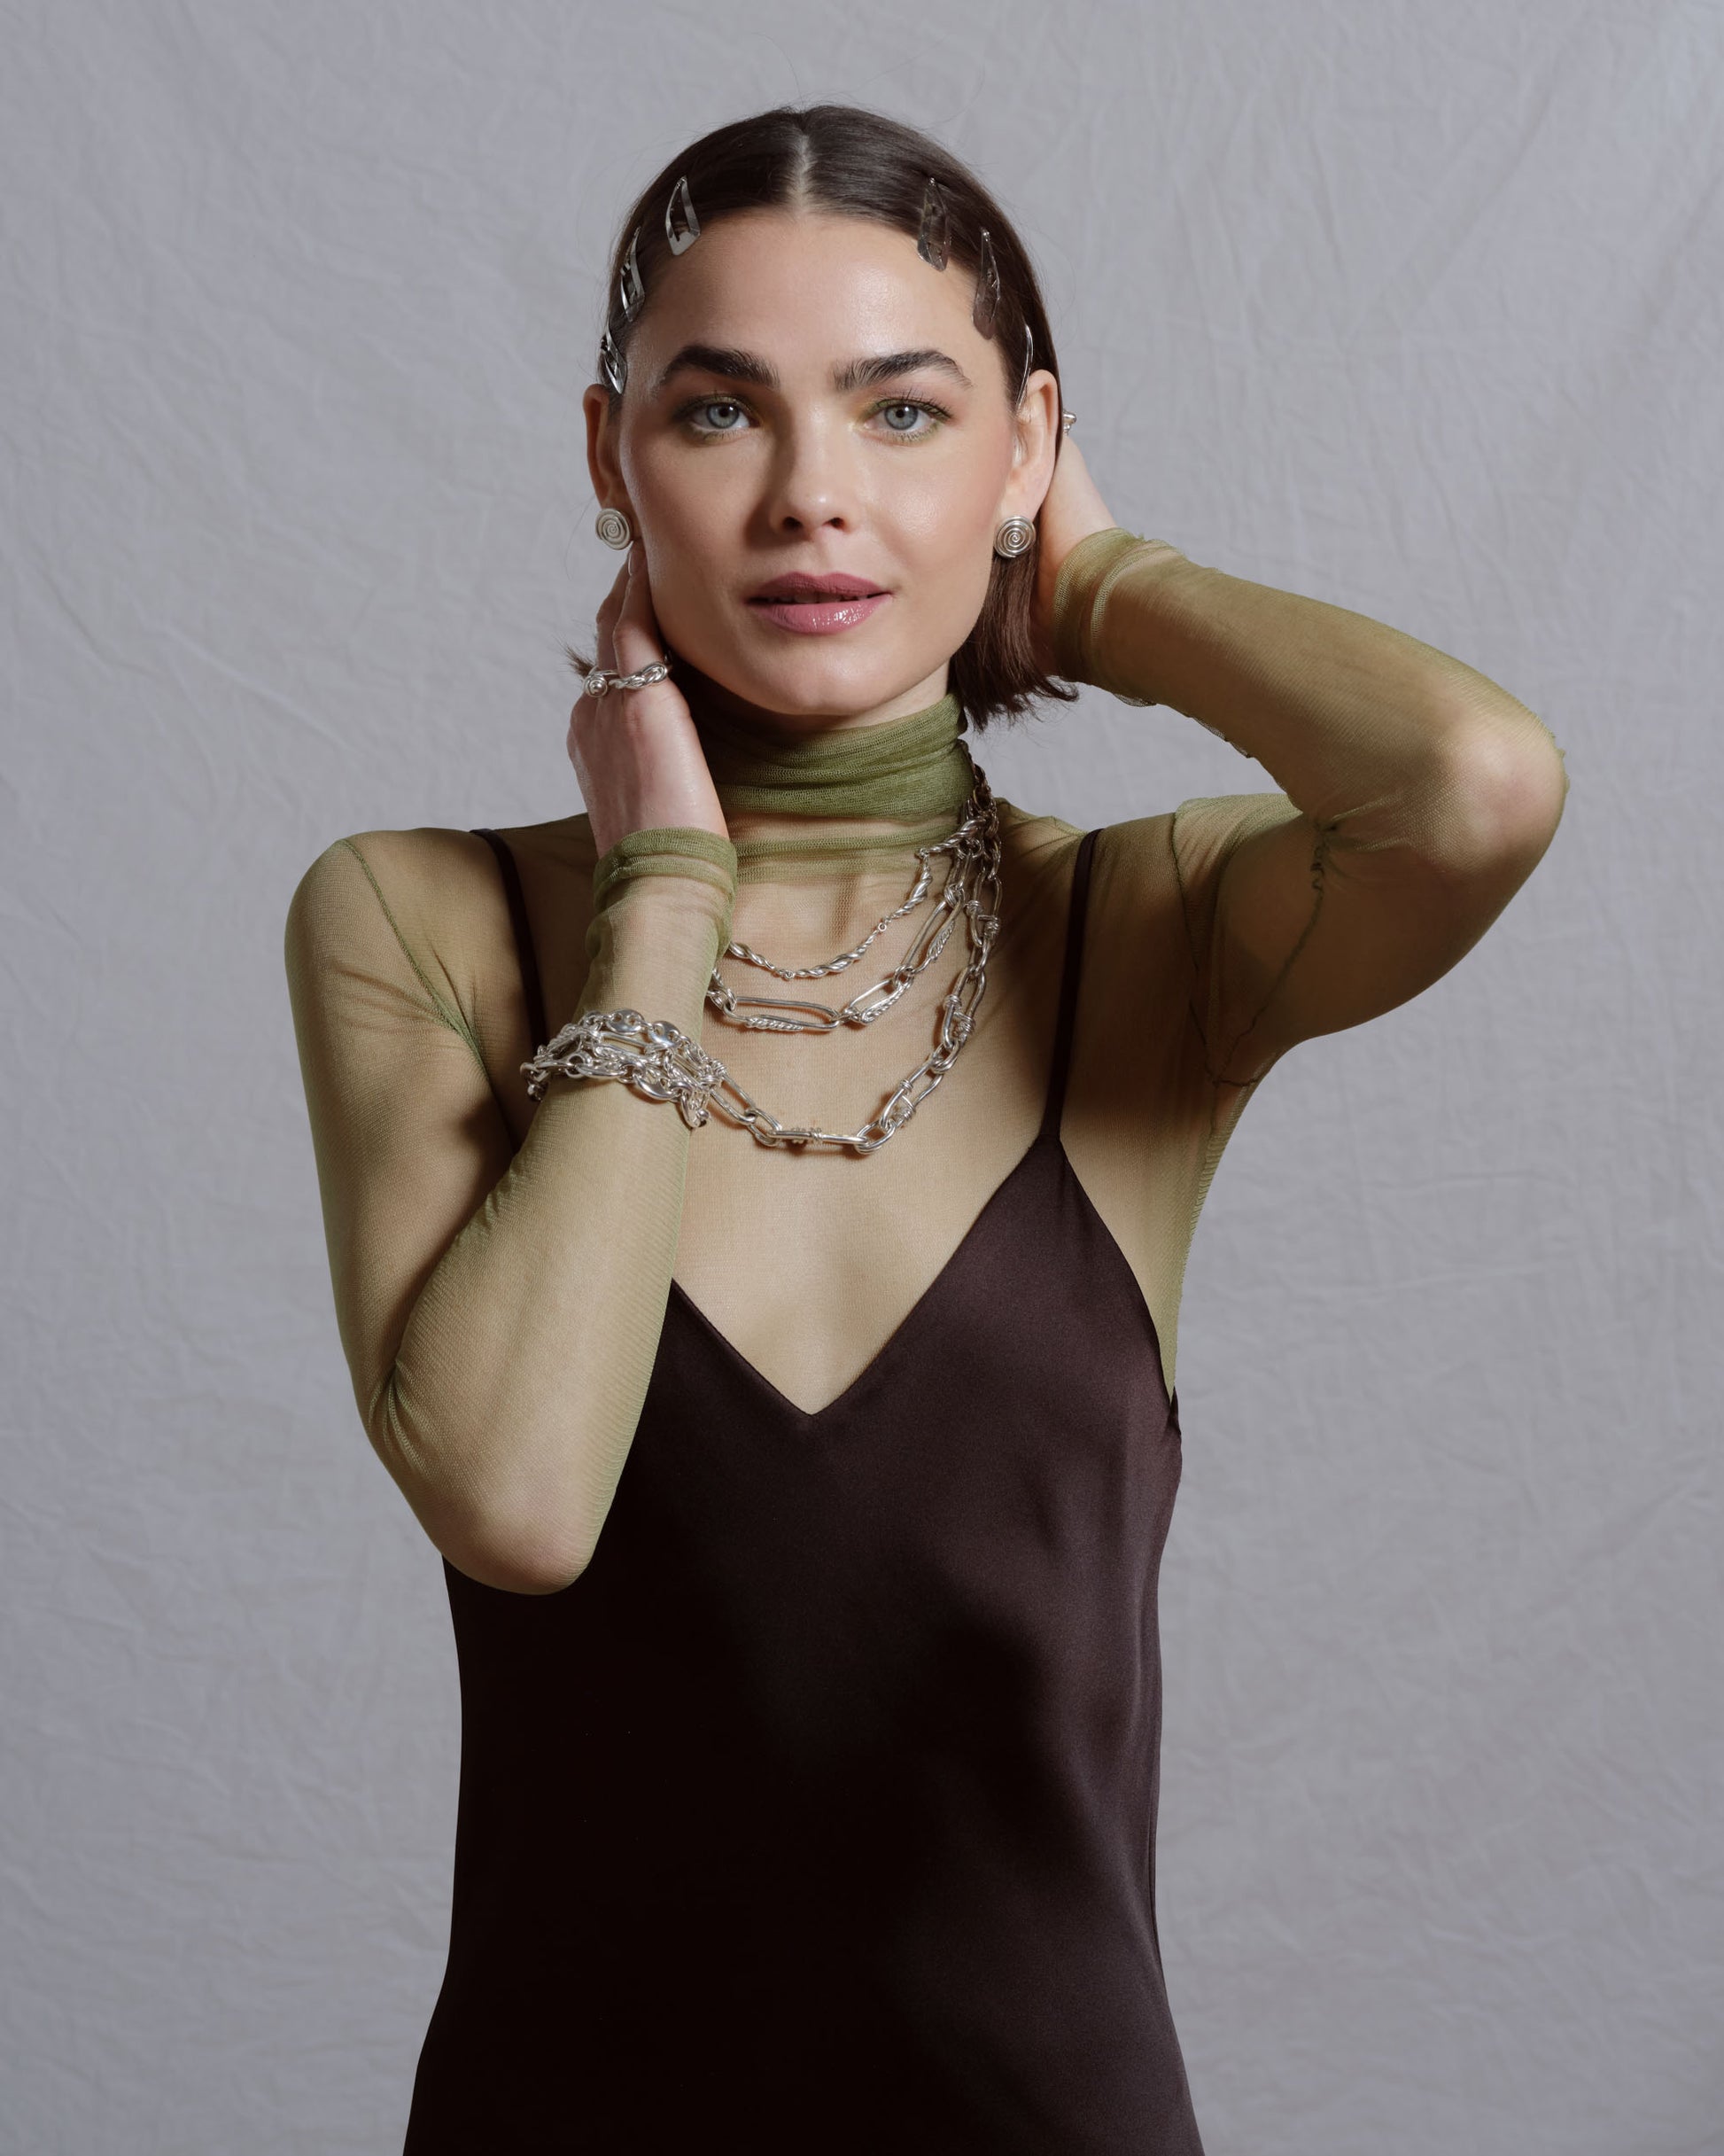 Styled image featuring CRZM jewelry on model.